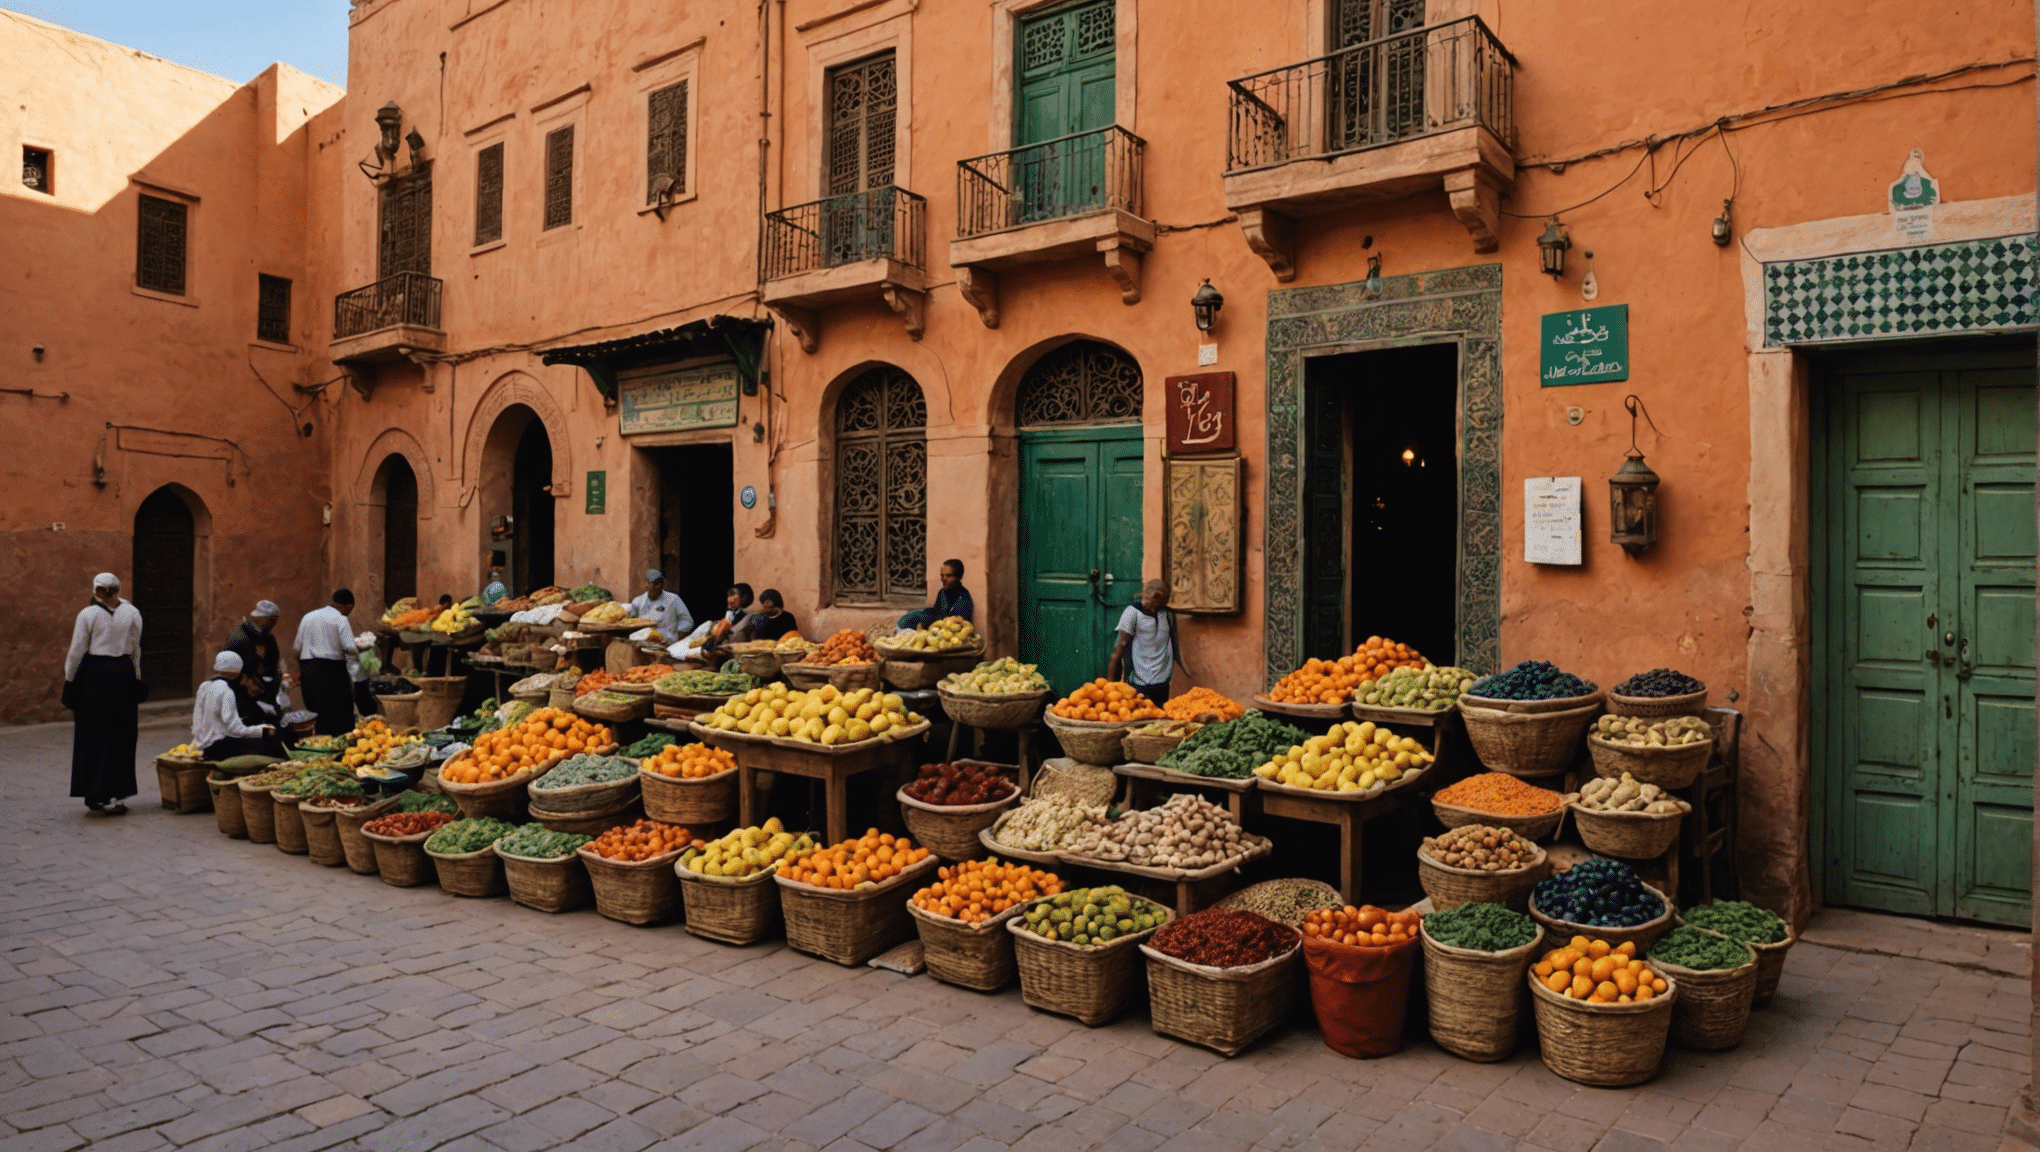 learn how to use a morocco data sim card for seamless connectivity during your travels in morocco with our comprehensive guide.